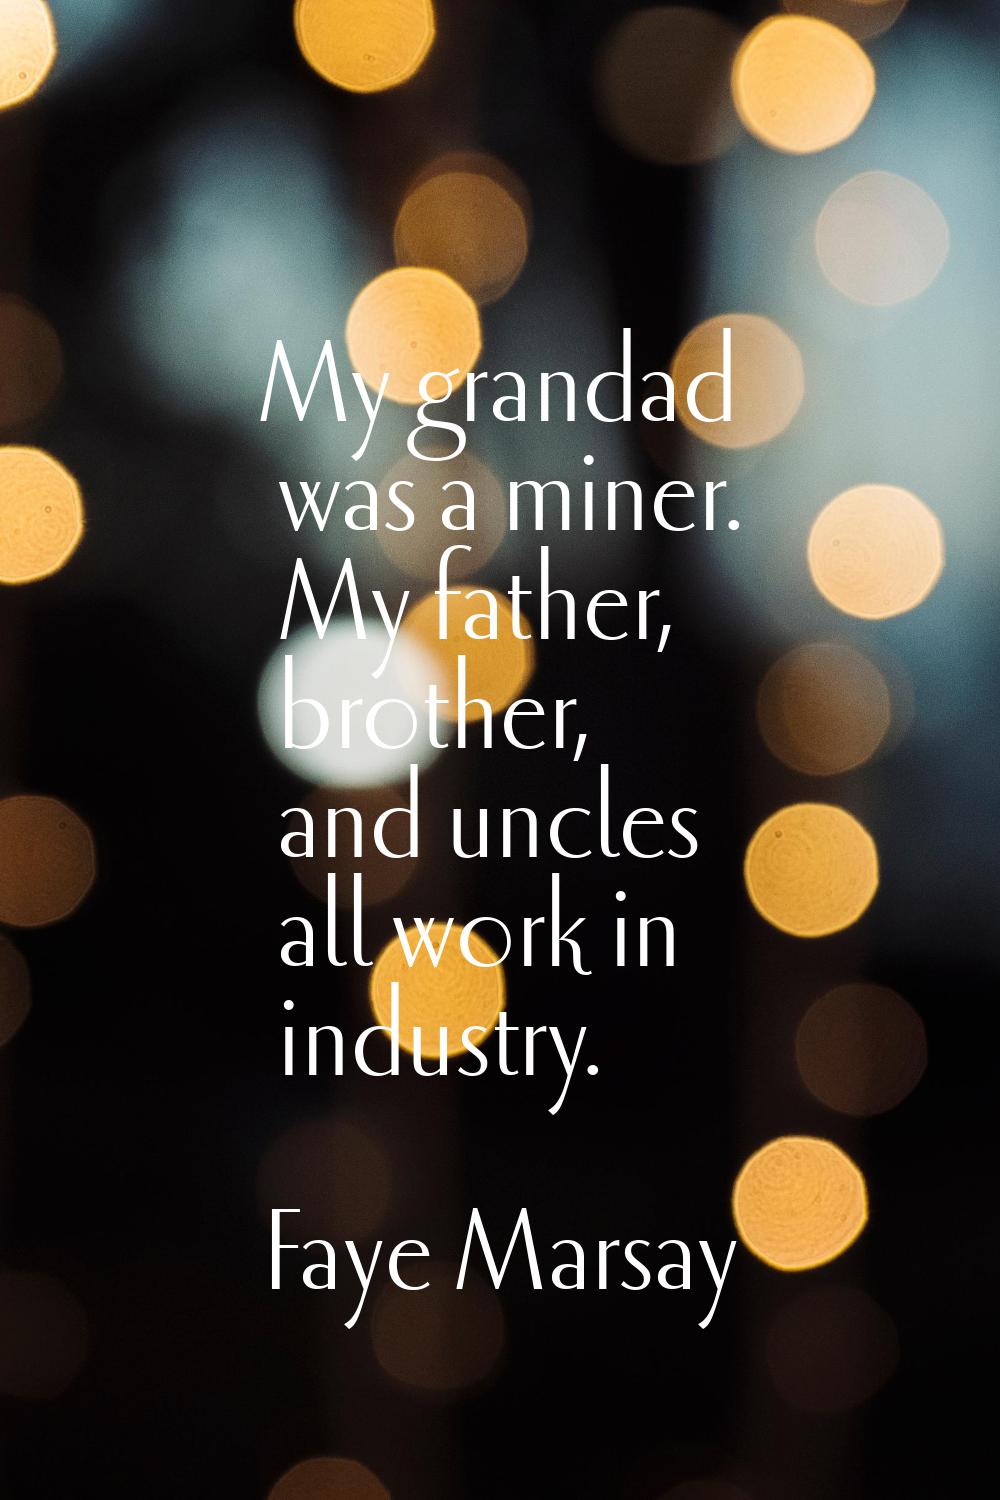 My grandad was a miner. My father, brother, and uncles all work in industry.